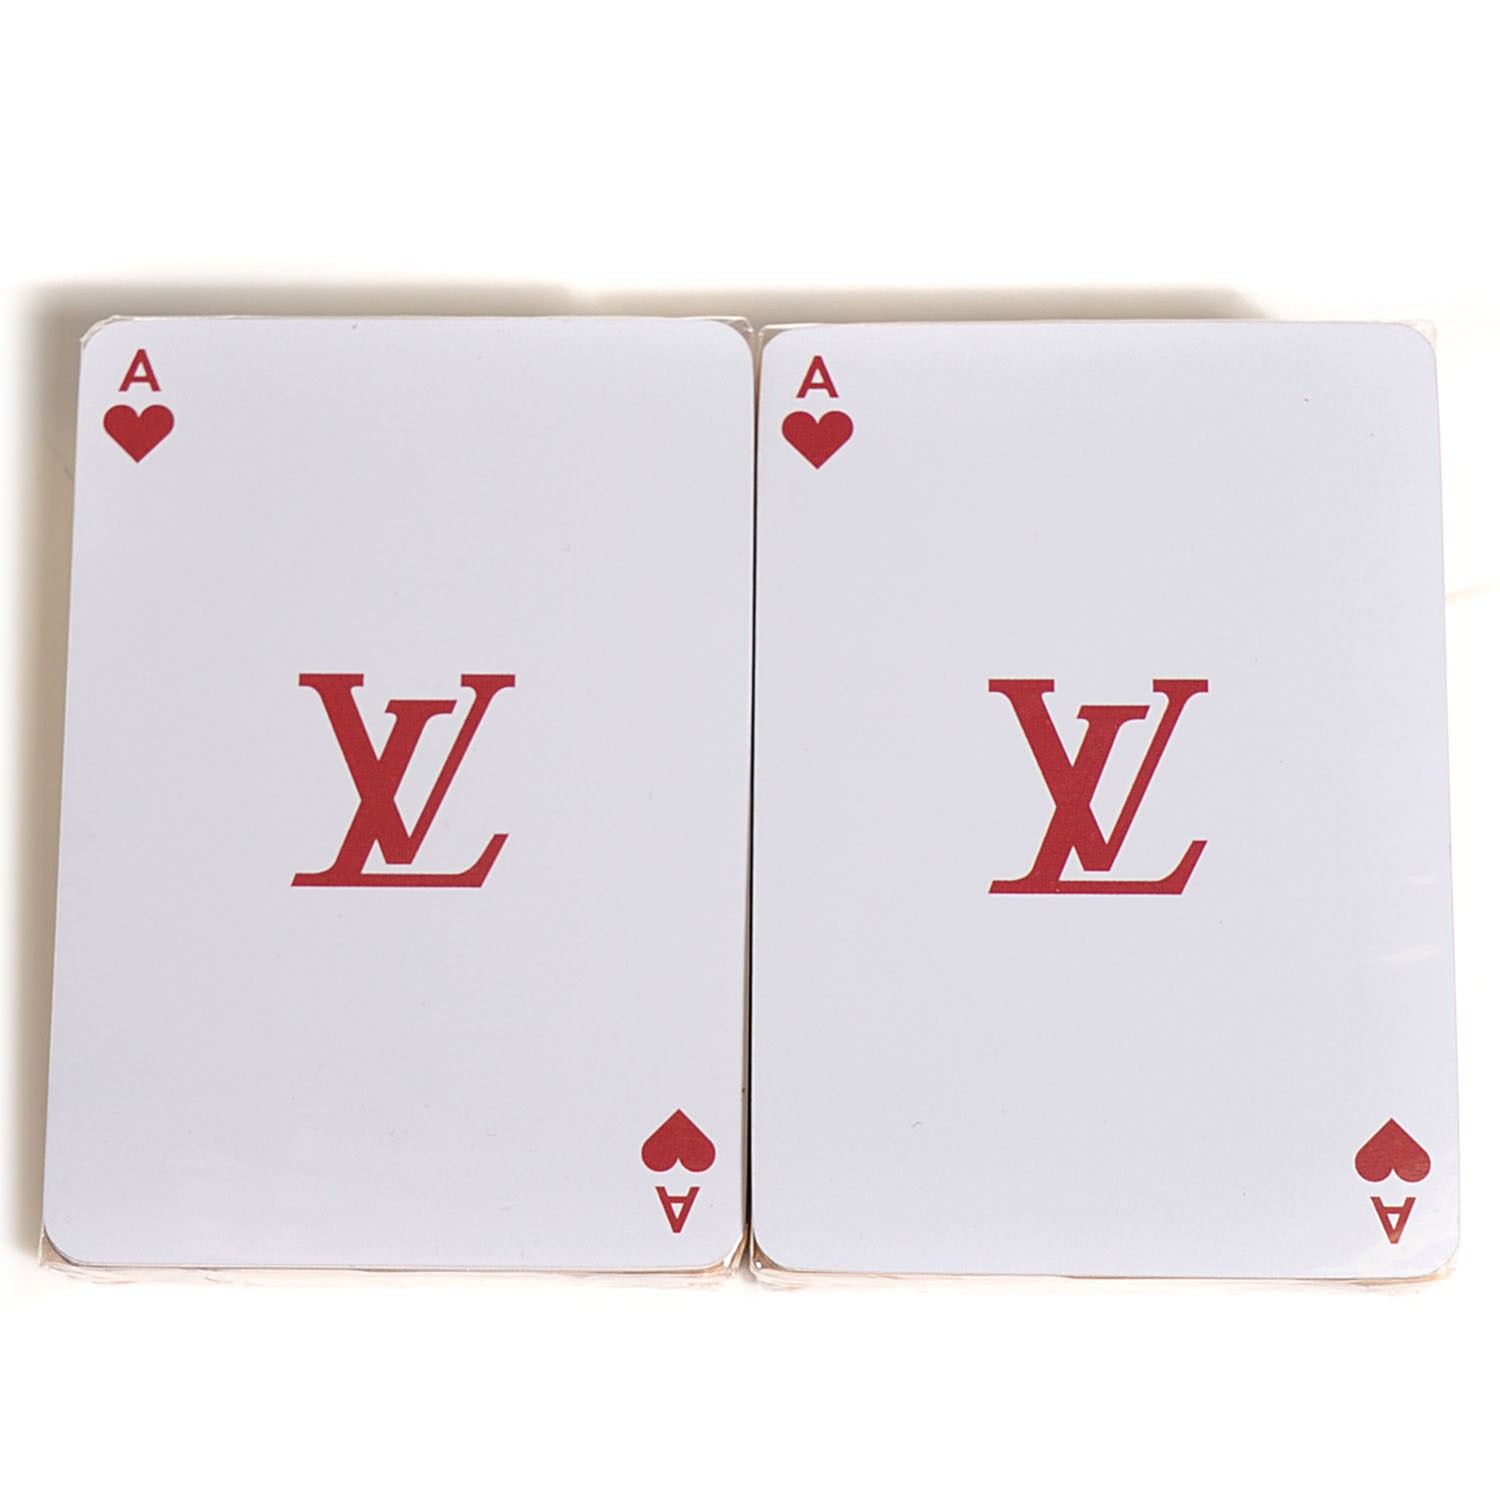 LOUIS VUITTON Multicolor Playing Cards Set of 2 102947